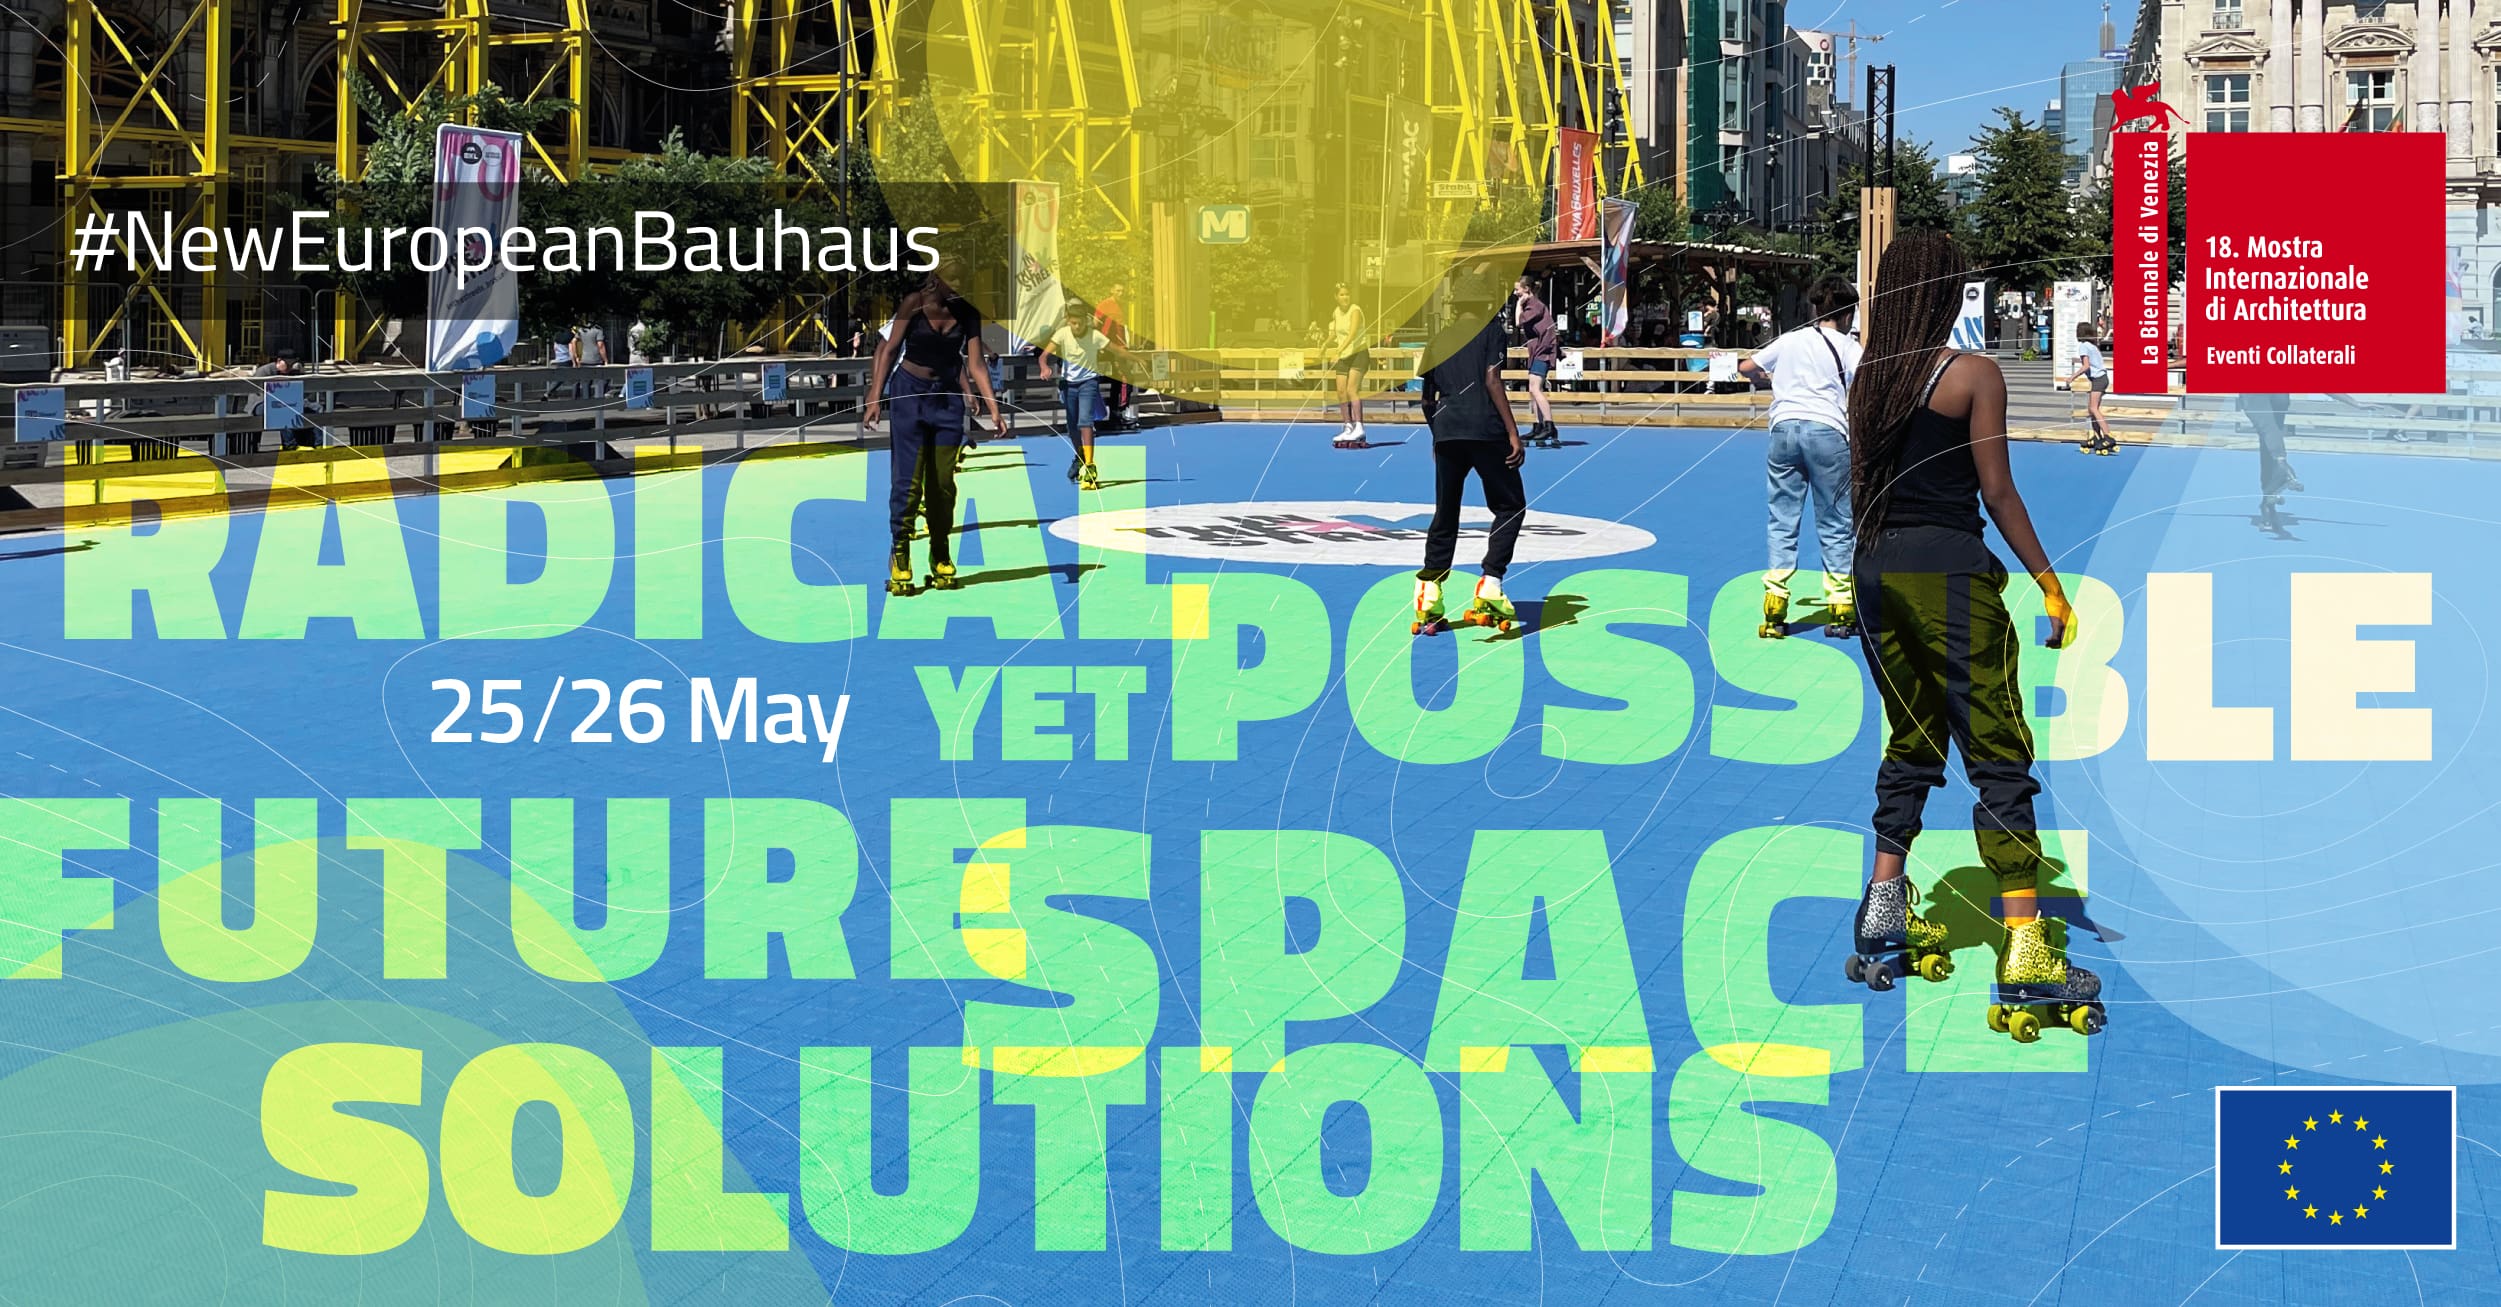 Radical yet possible future space solutions. New European Bauhaus. Evento collaterale della Biennale Architettura 2023